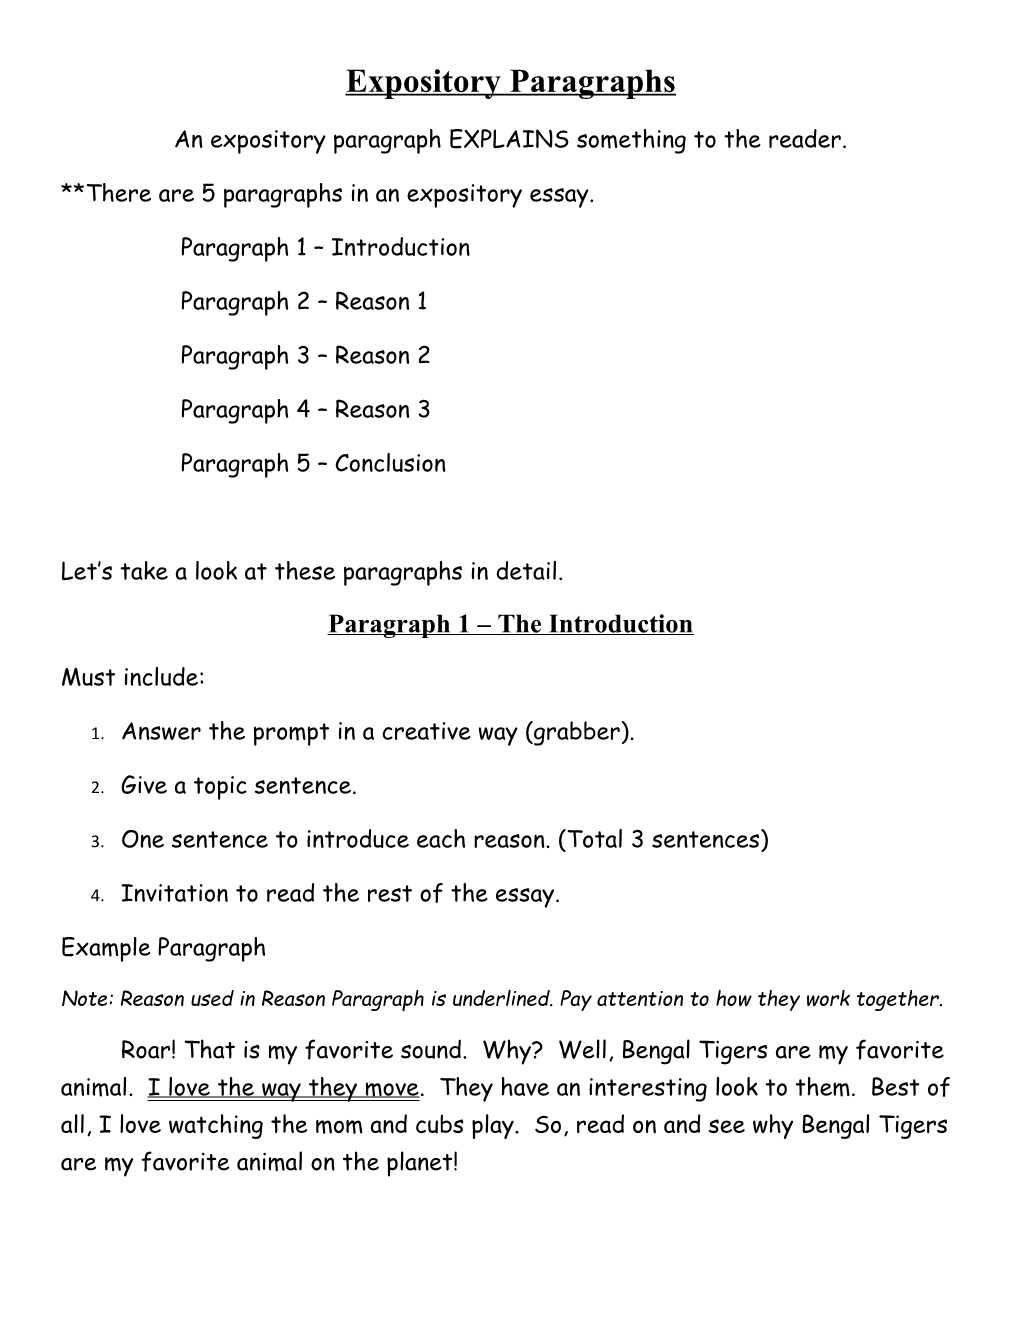 An Expository Paragraph EXPLAINS Something to the Reader